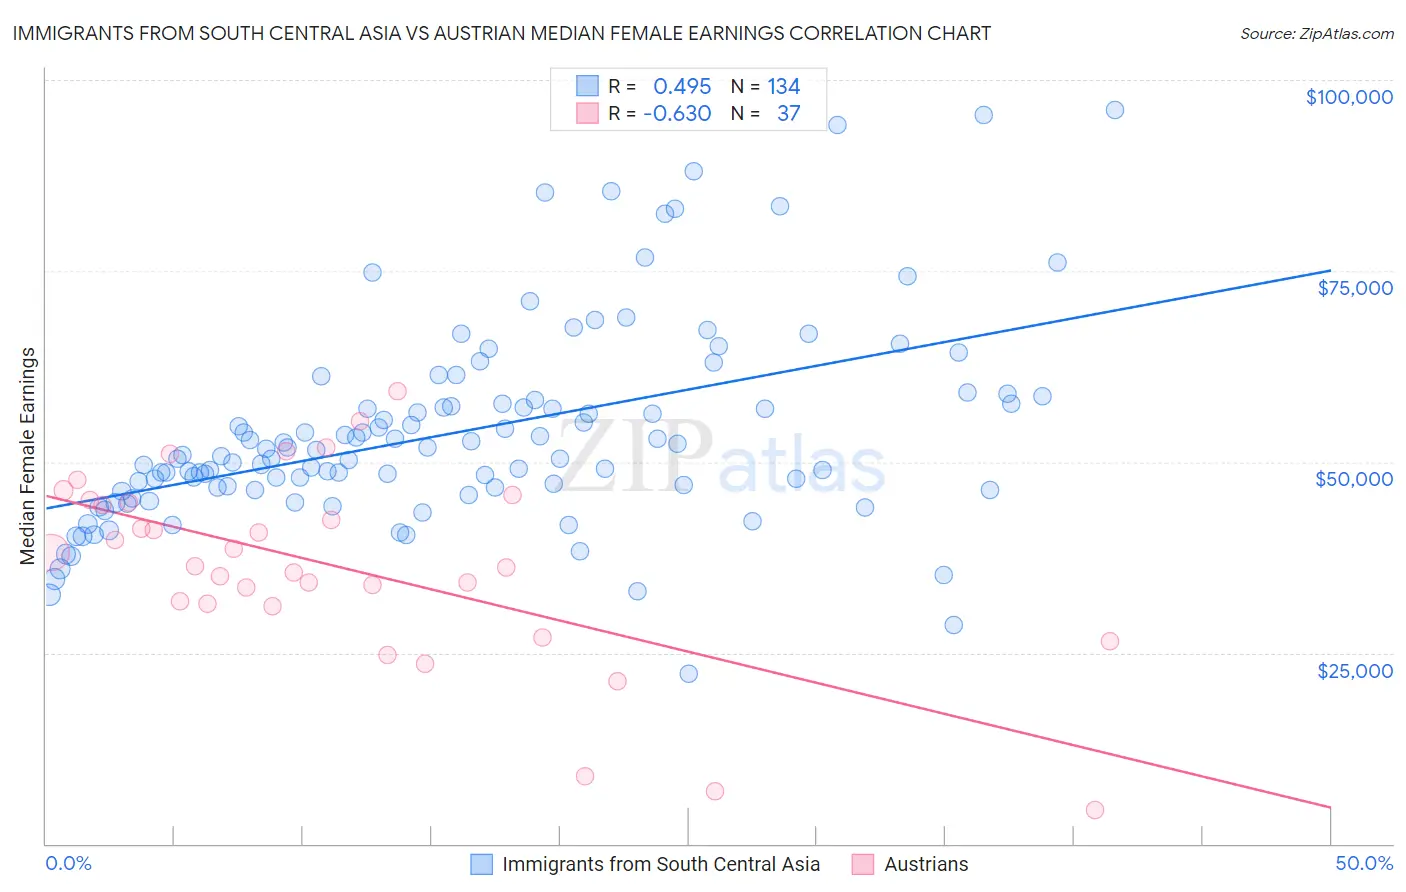 Immigrants from South Central Asia vs Austrian Median Female Earnings